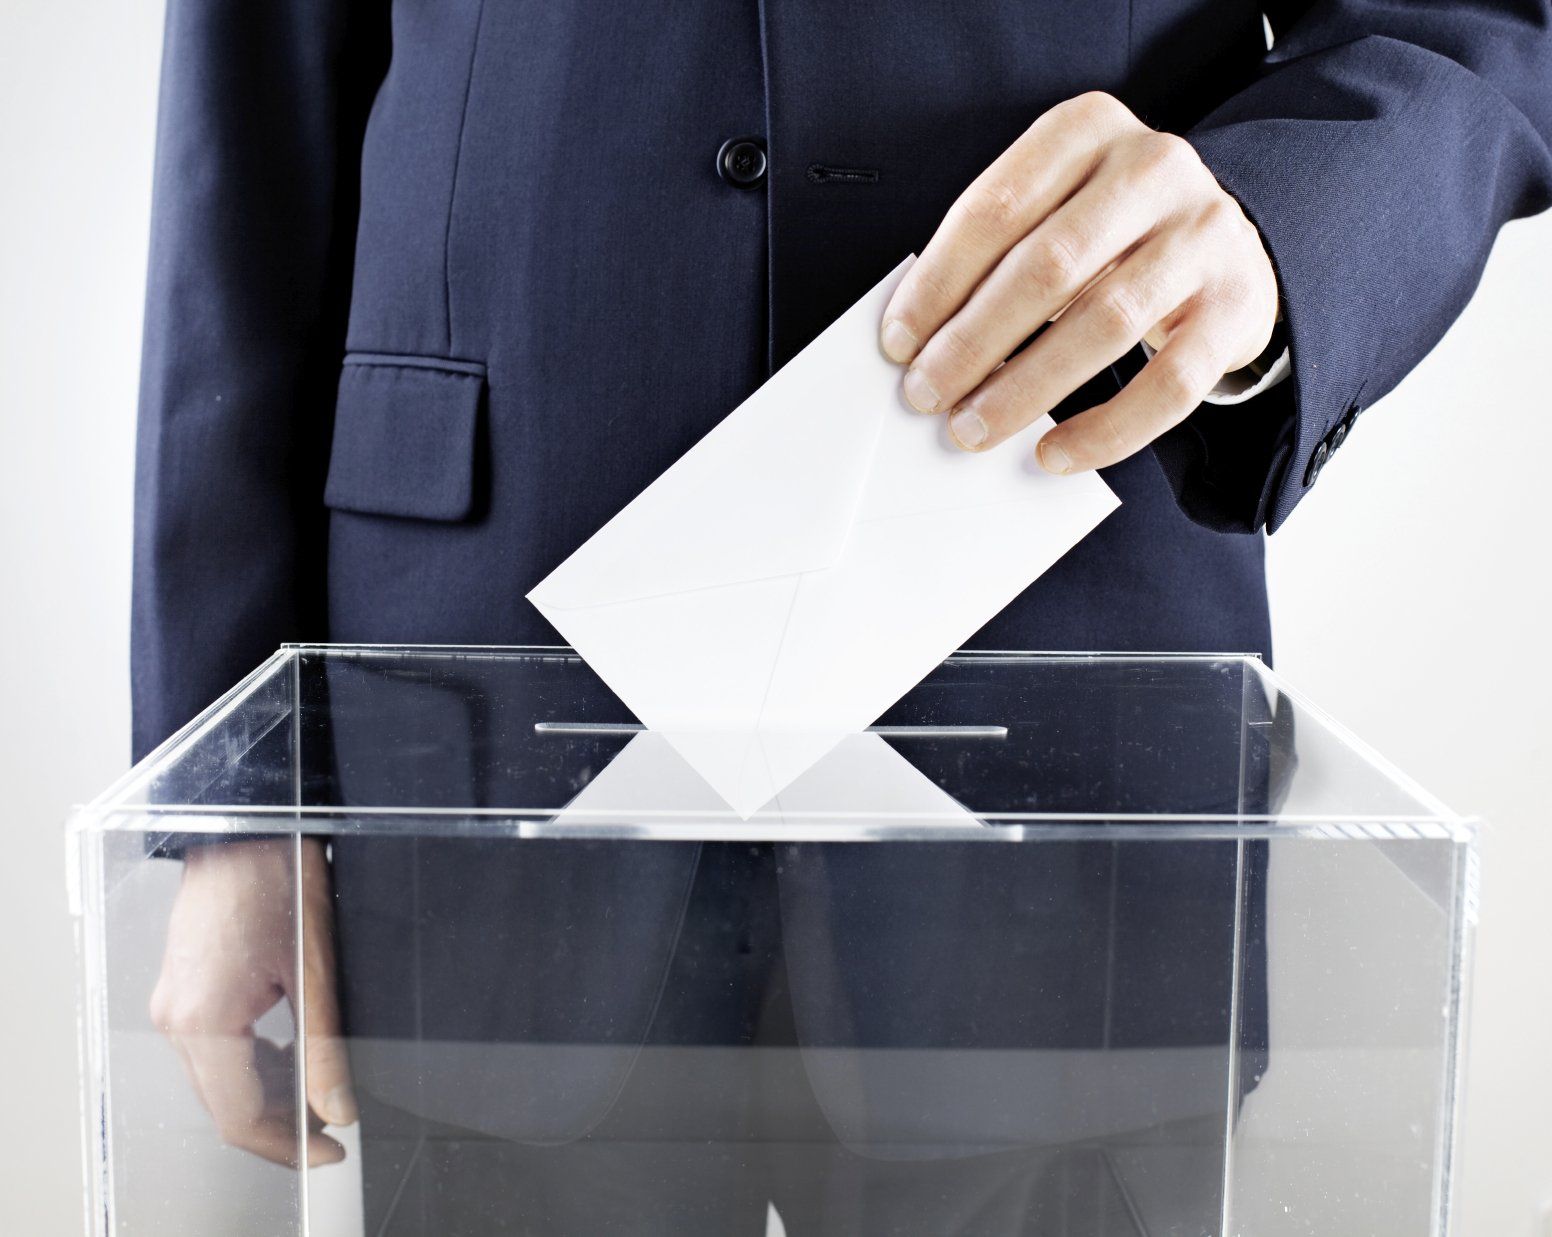 A person in a suit holding an enveloppe or a ballot, putting it into a glass box.